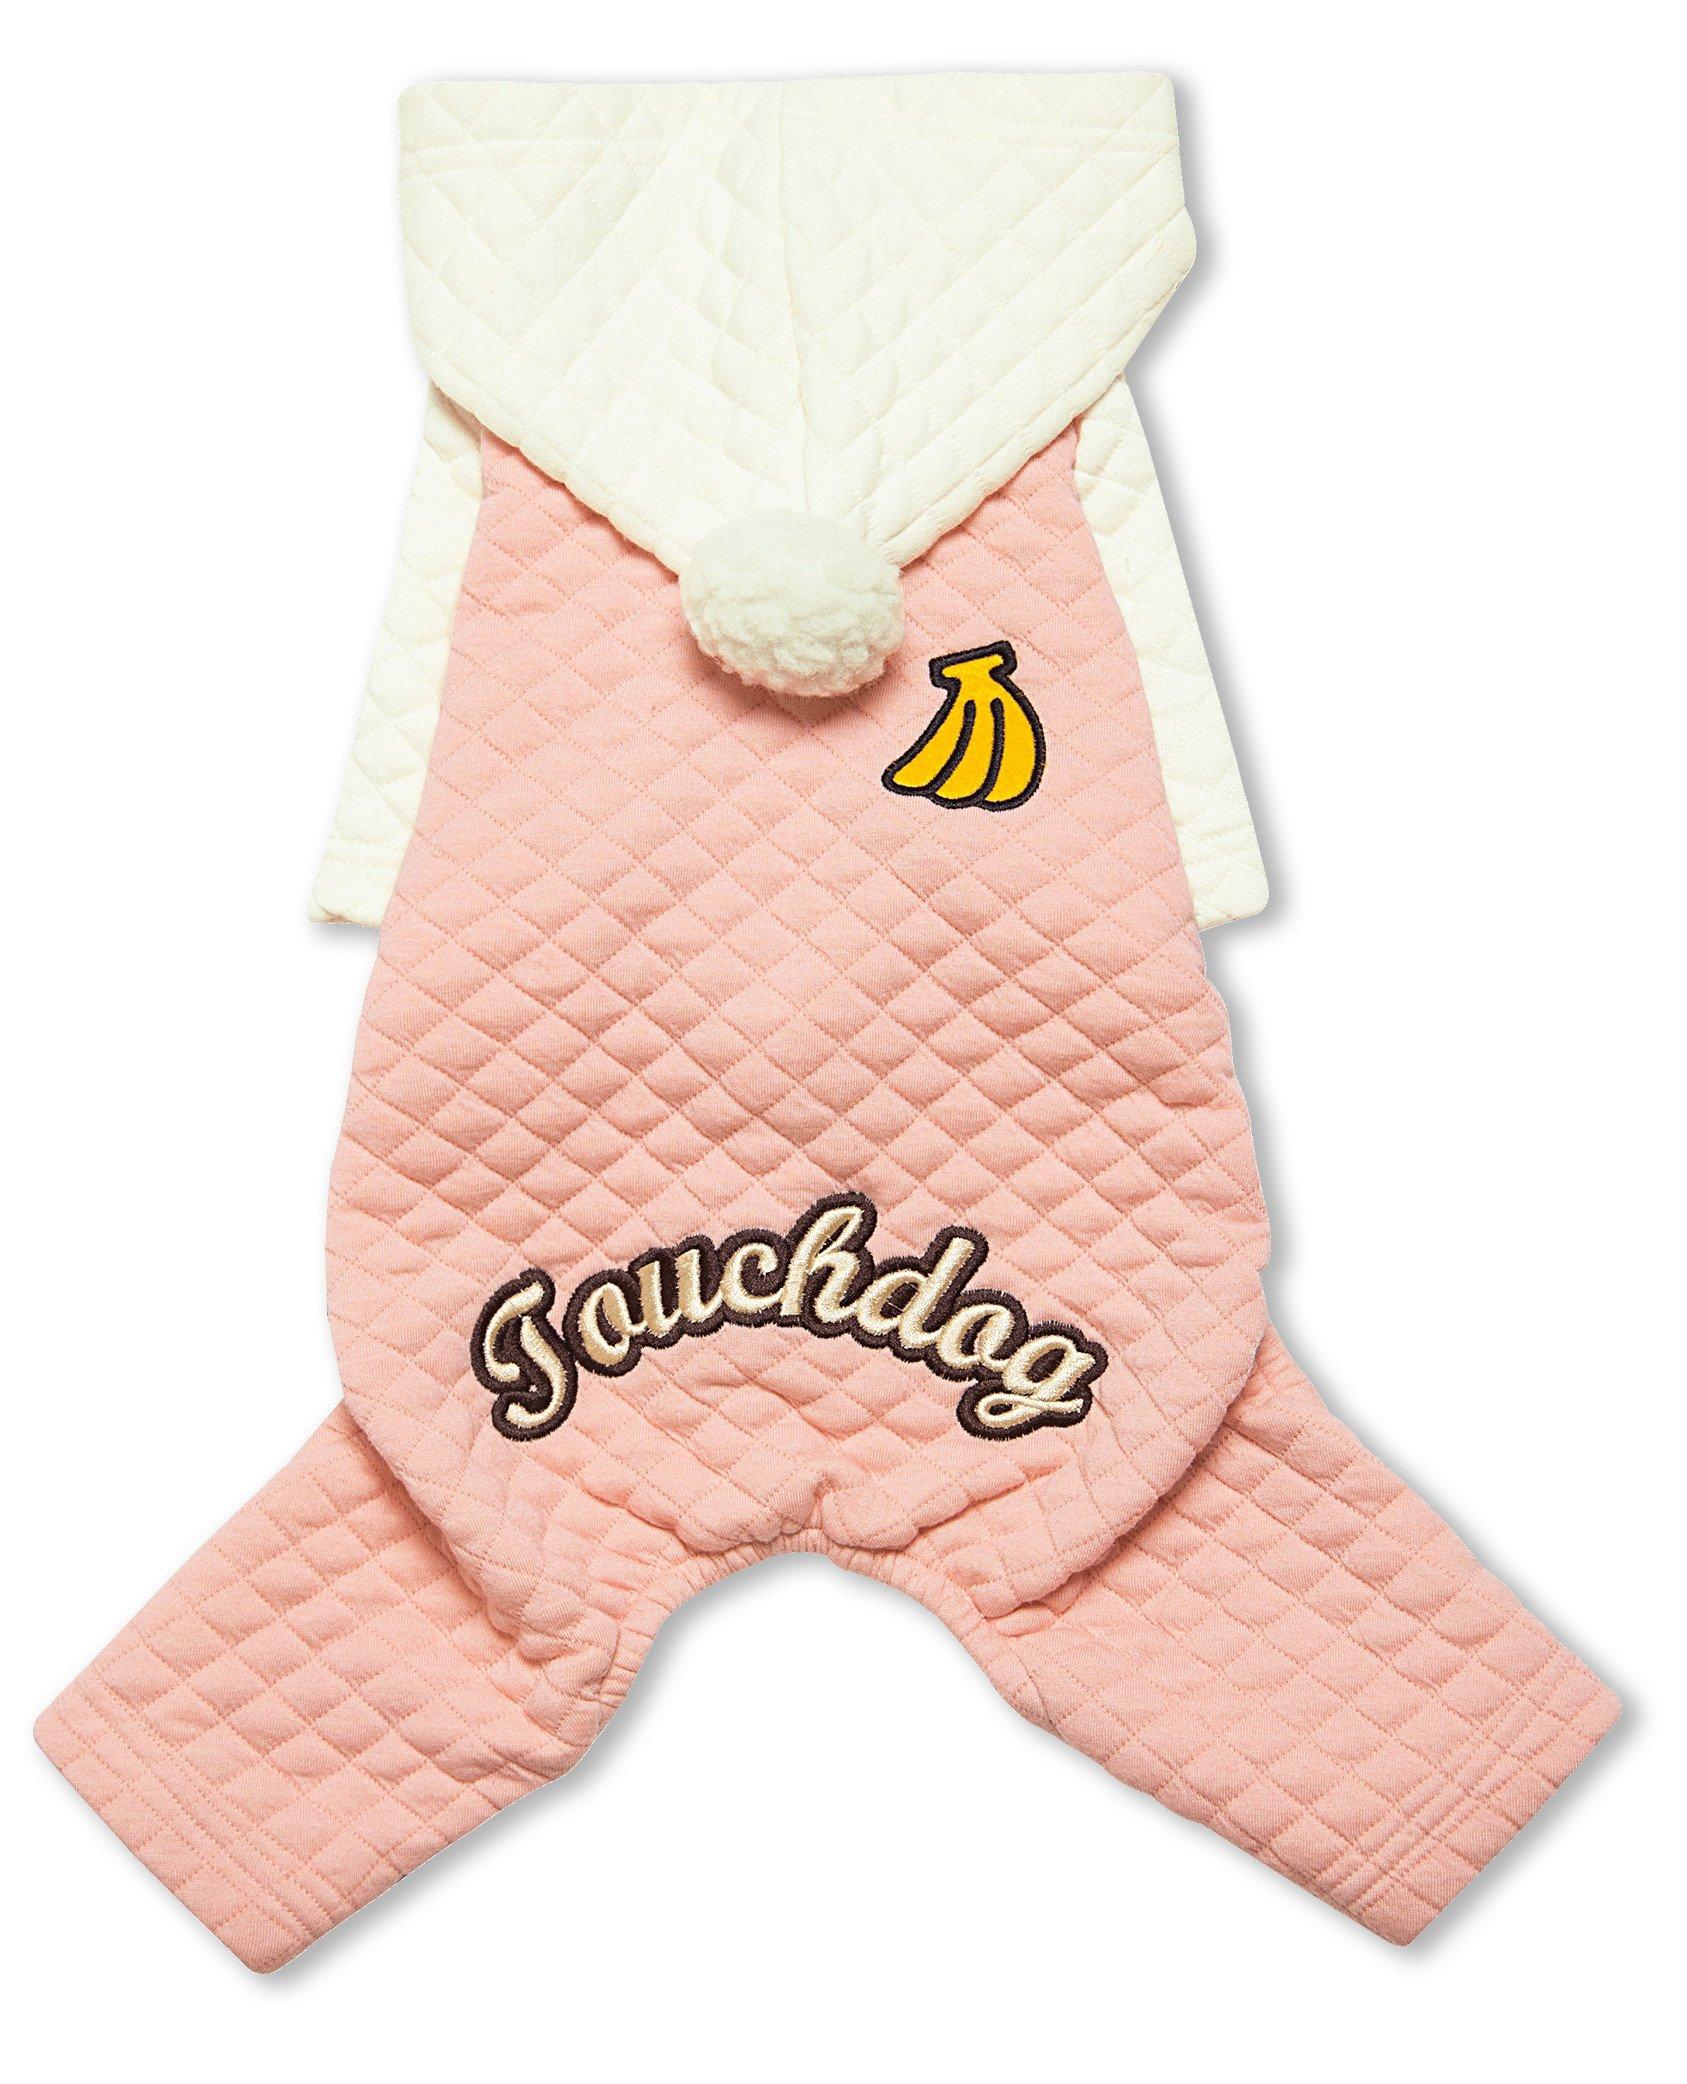 Touchdog Fashion Designer Full Body Quilted Pet Dog Hooded Sweater - Small - Pink/White